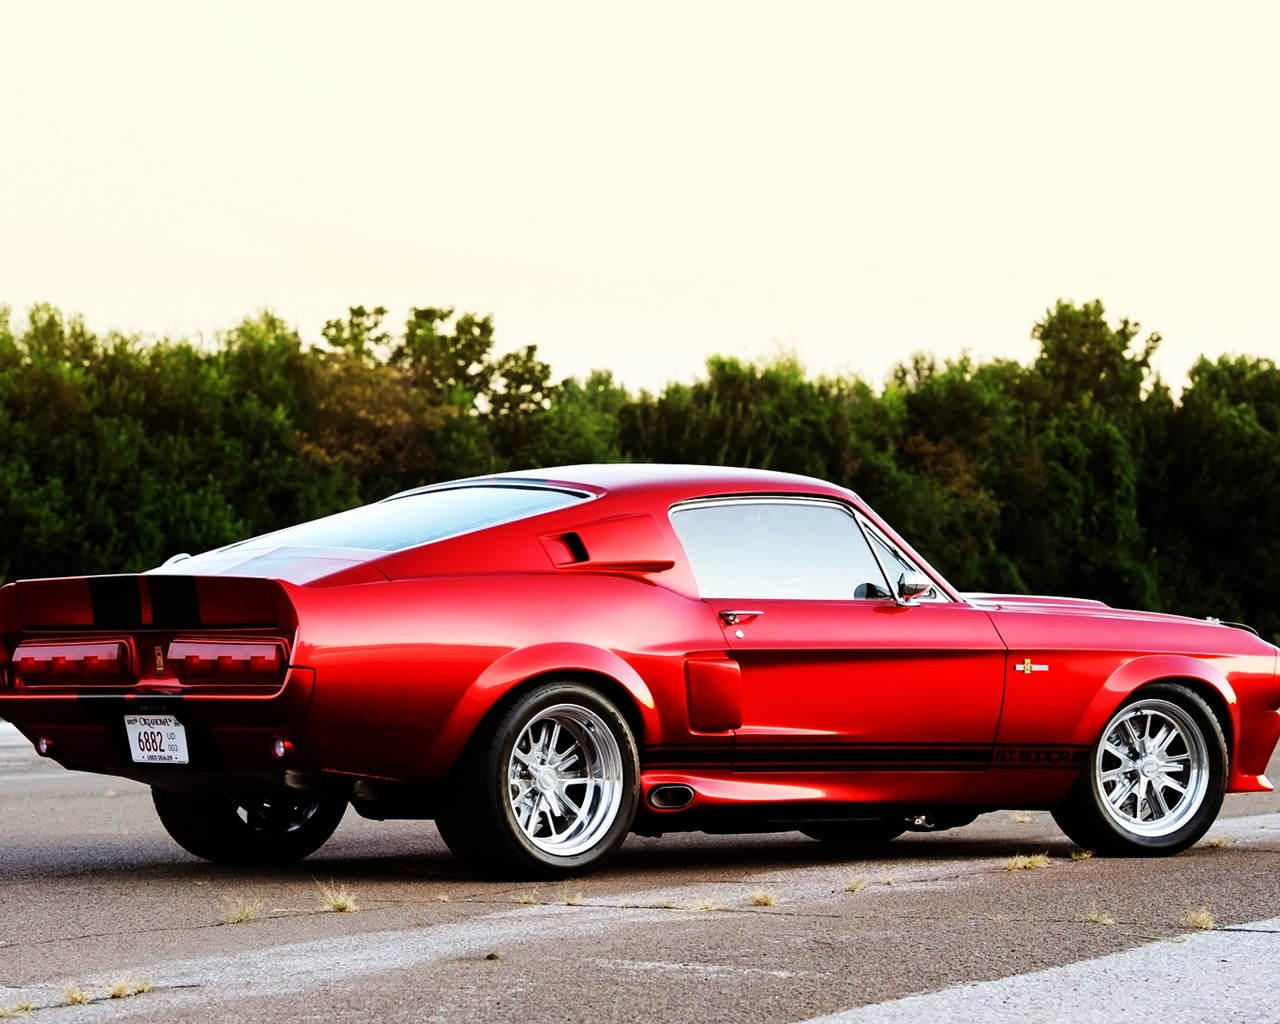 2011 Shelby GT500CR Rear for 1280 x 1024 resolution